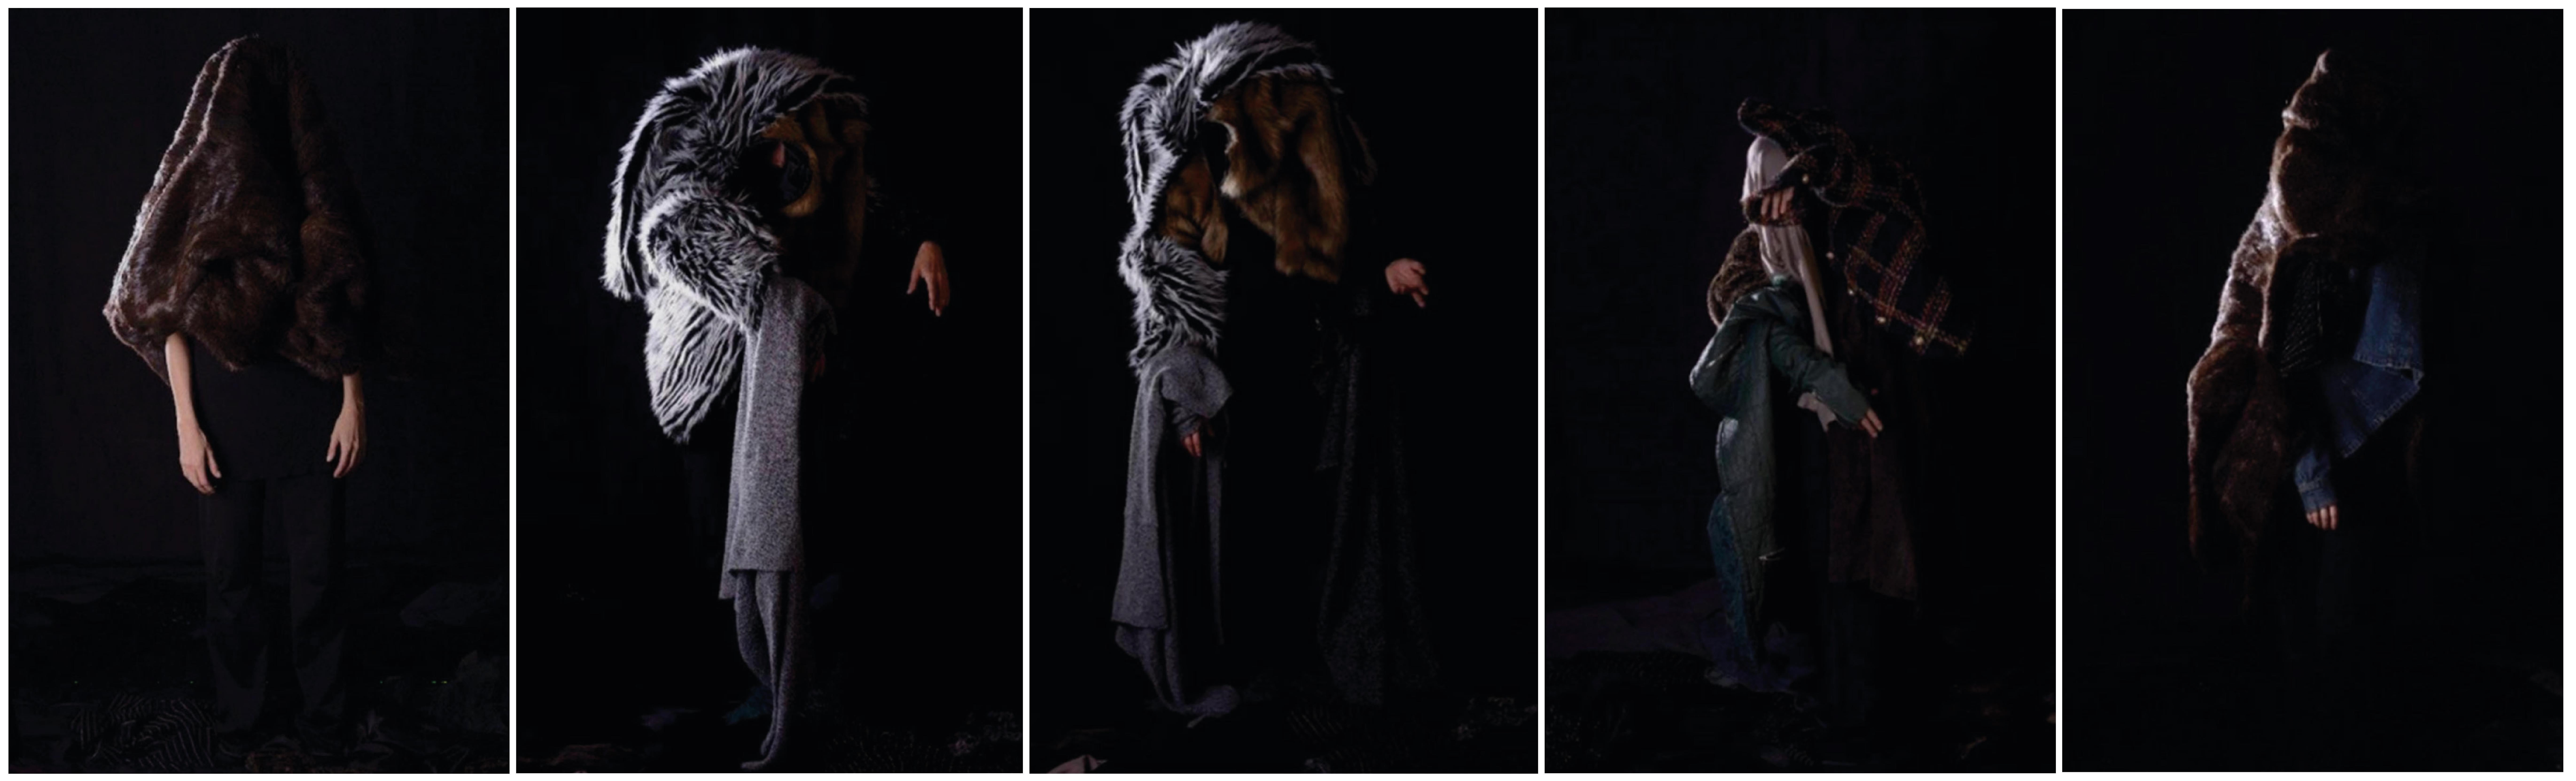 Maria José Arjona Figurative Photograph - The frequencies I am made of. performance photography color portrait